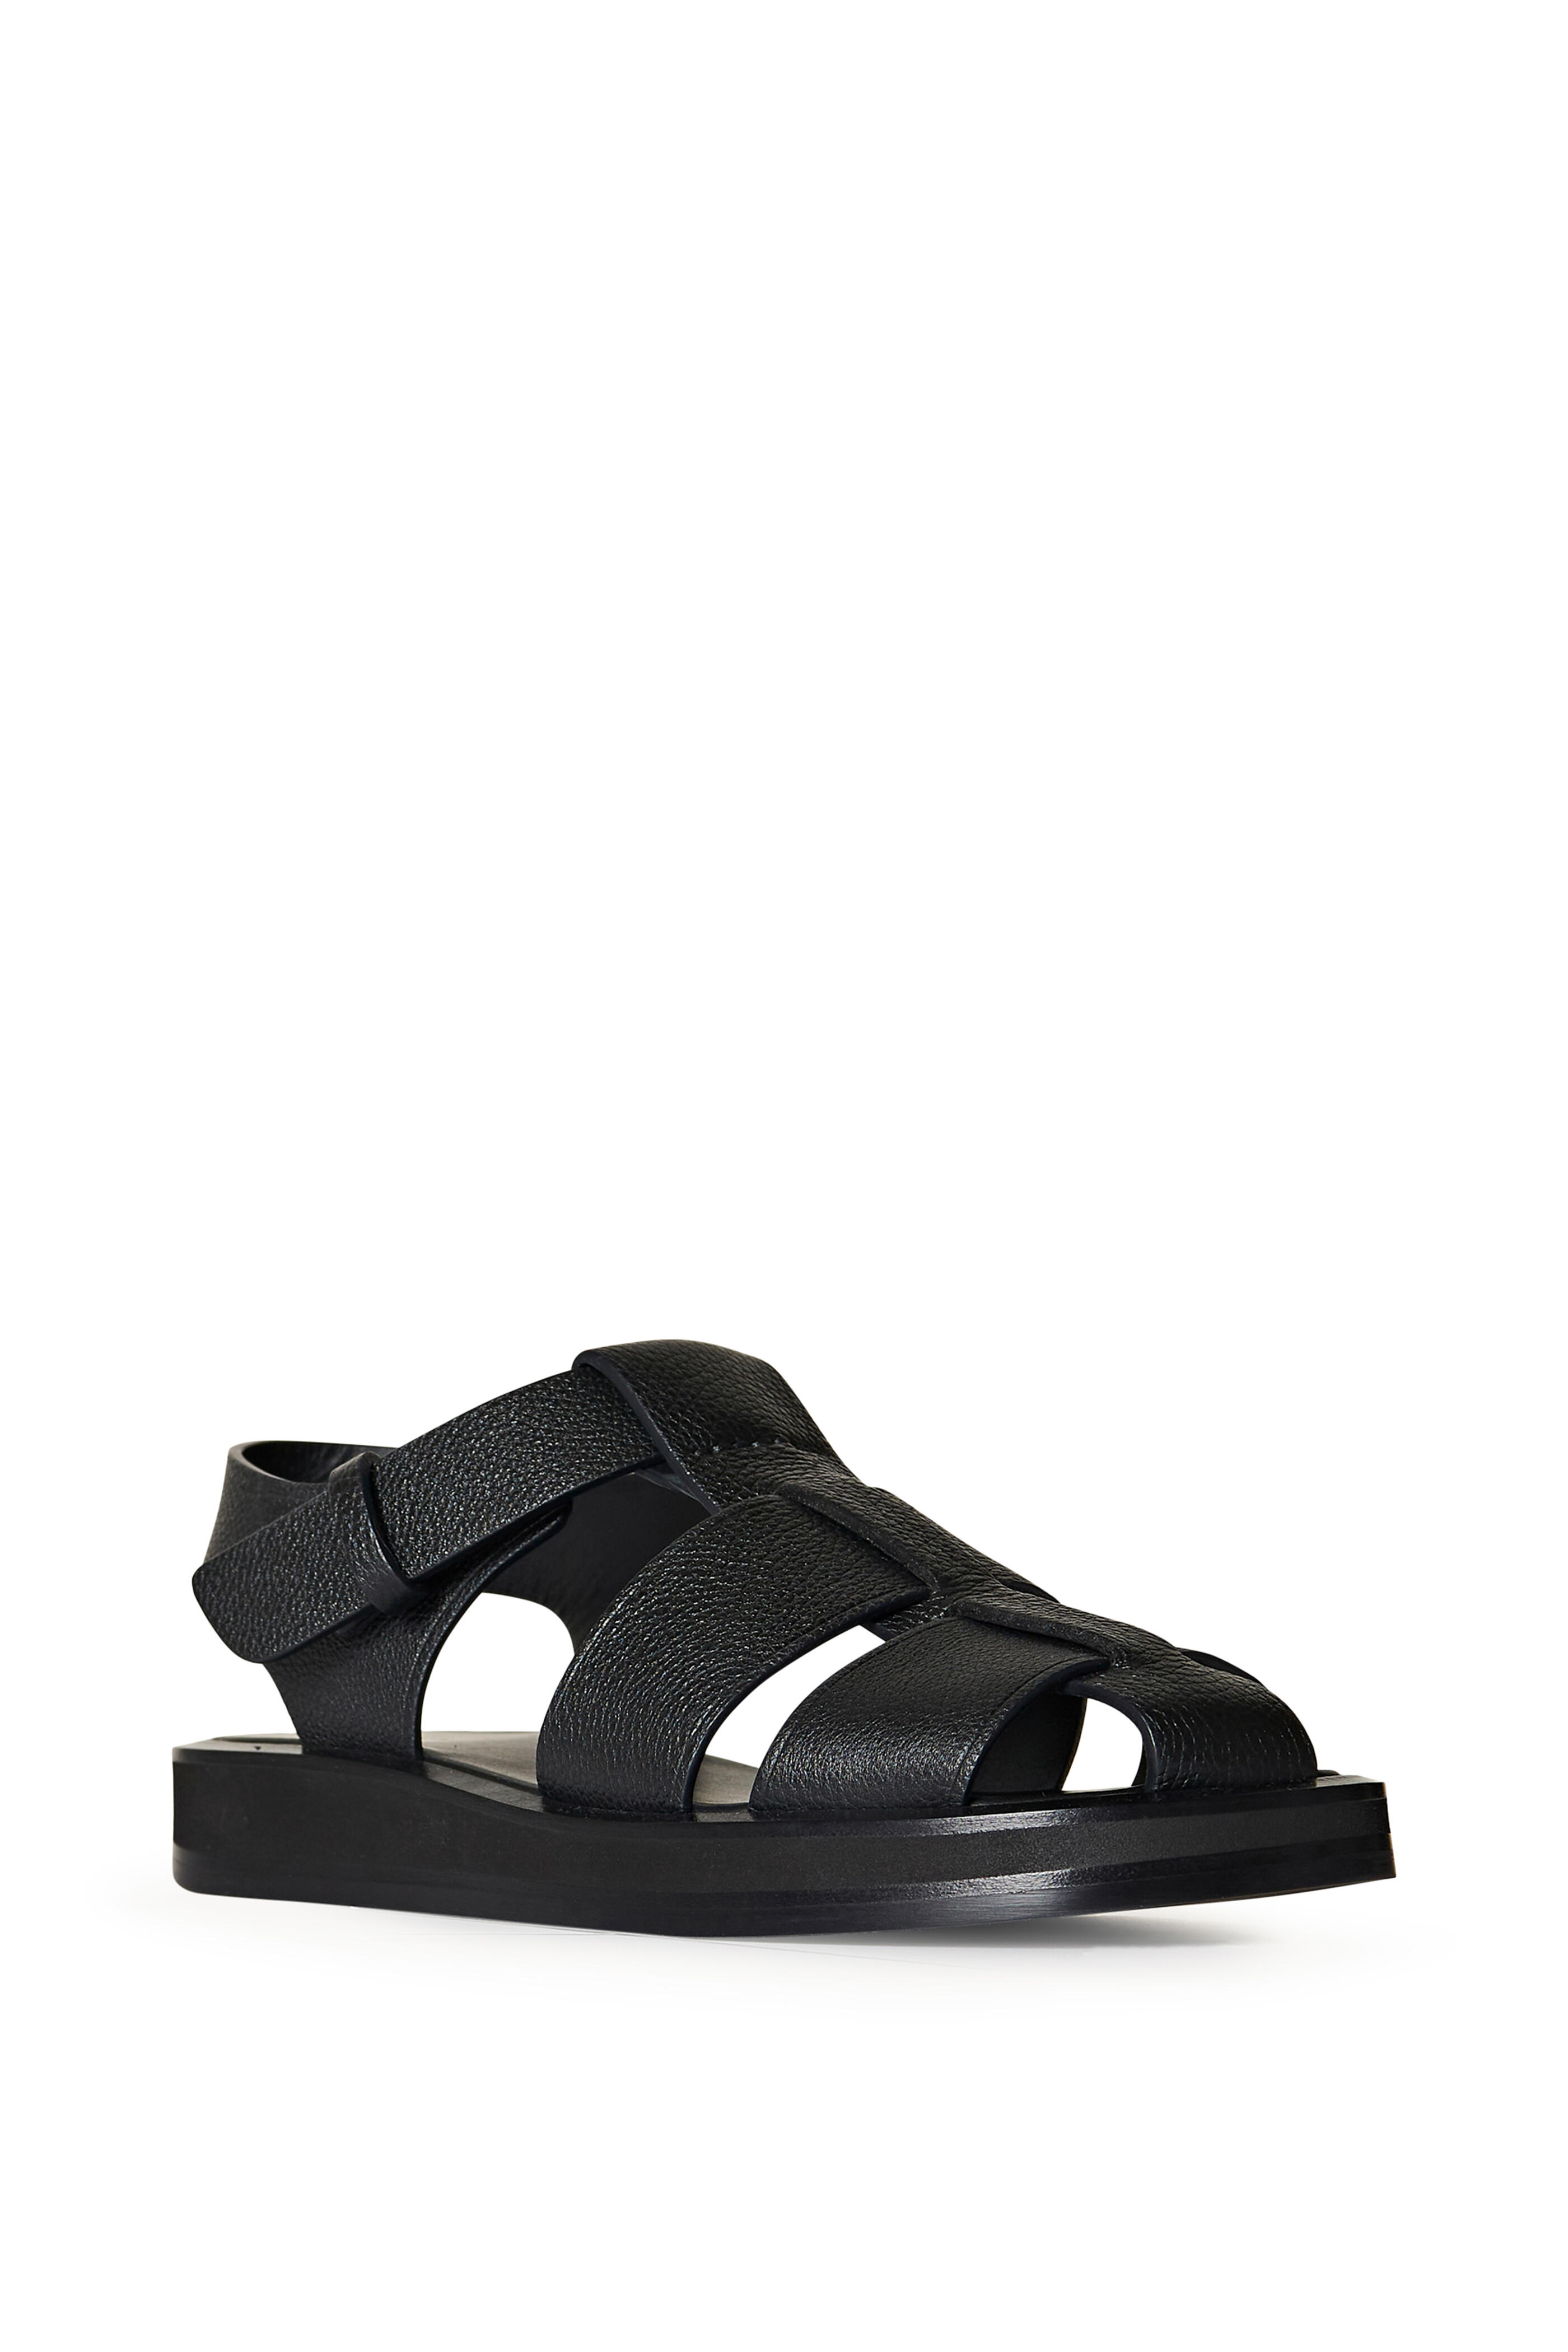 The Row - Fisherman Black Grained Leather Sandal